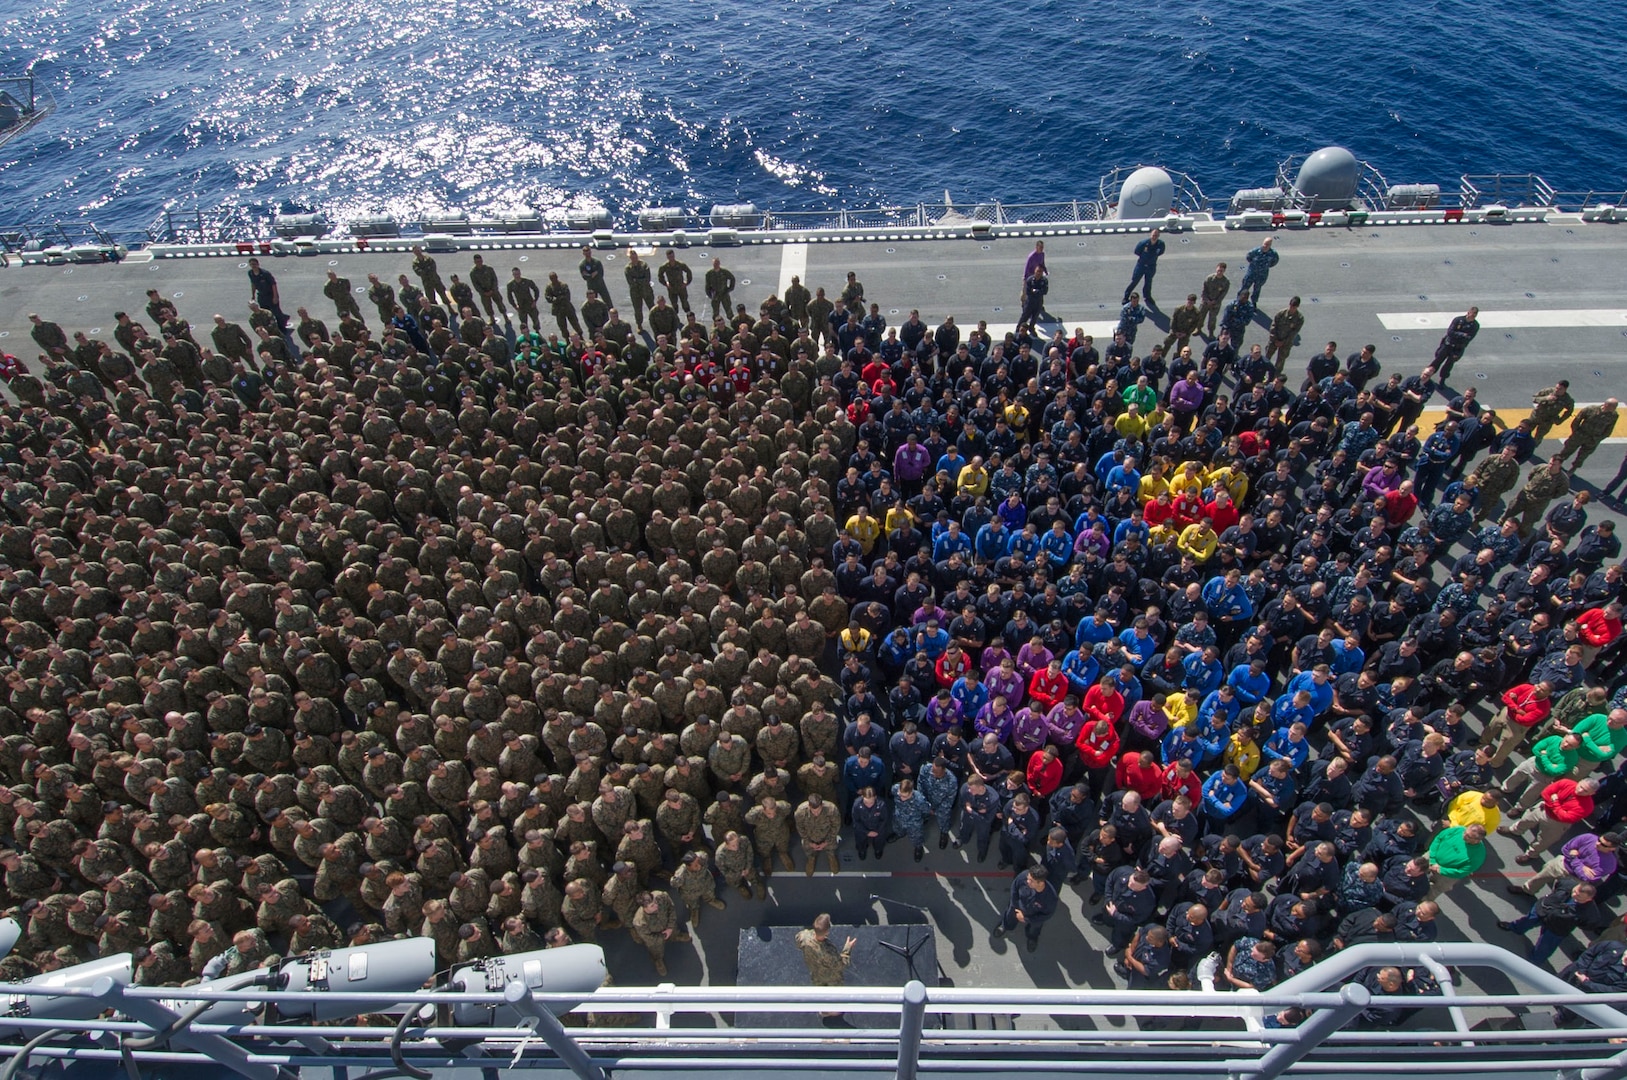 Commander Task Force 51 Marine Major General Carl E. Mundy III addresses Sailors and Marines during all-hands call on flight deck of USS Essex, Pacific Ocean, February 26, 2015 (U.S. Navy/Jason M. Graham)